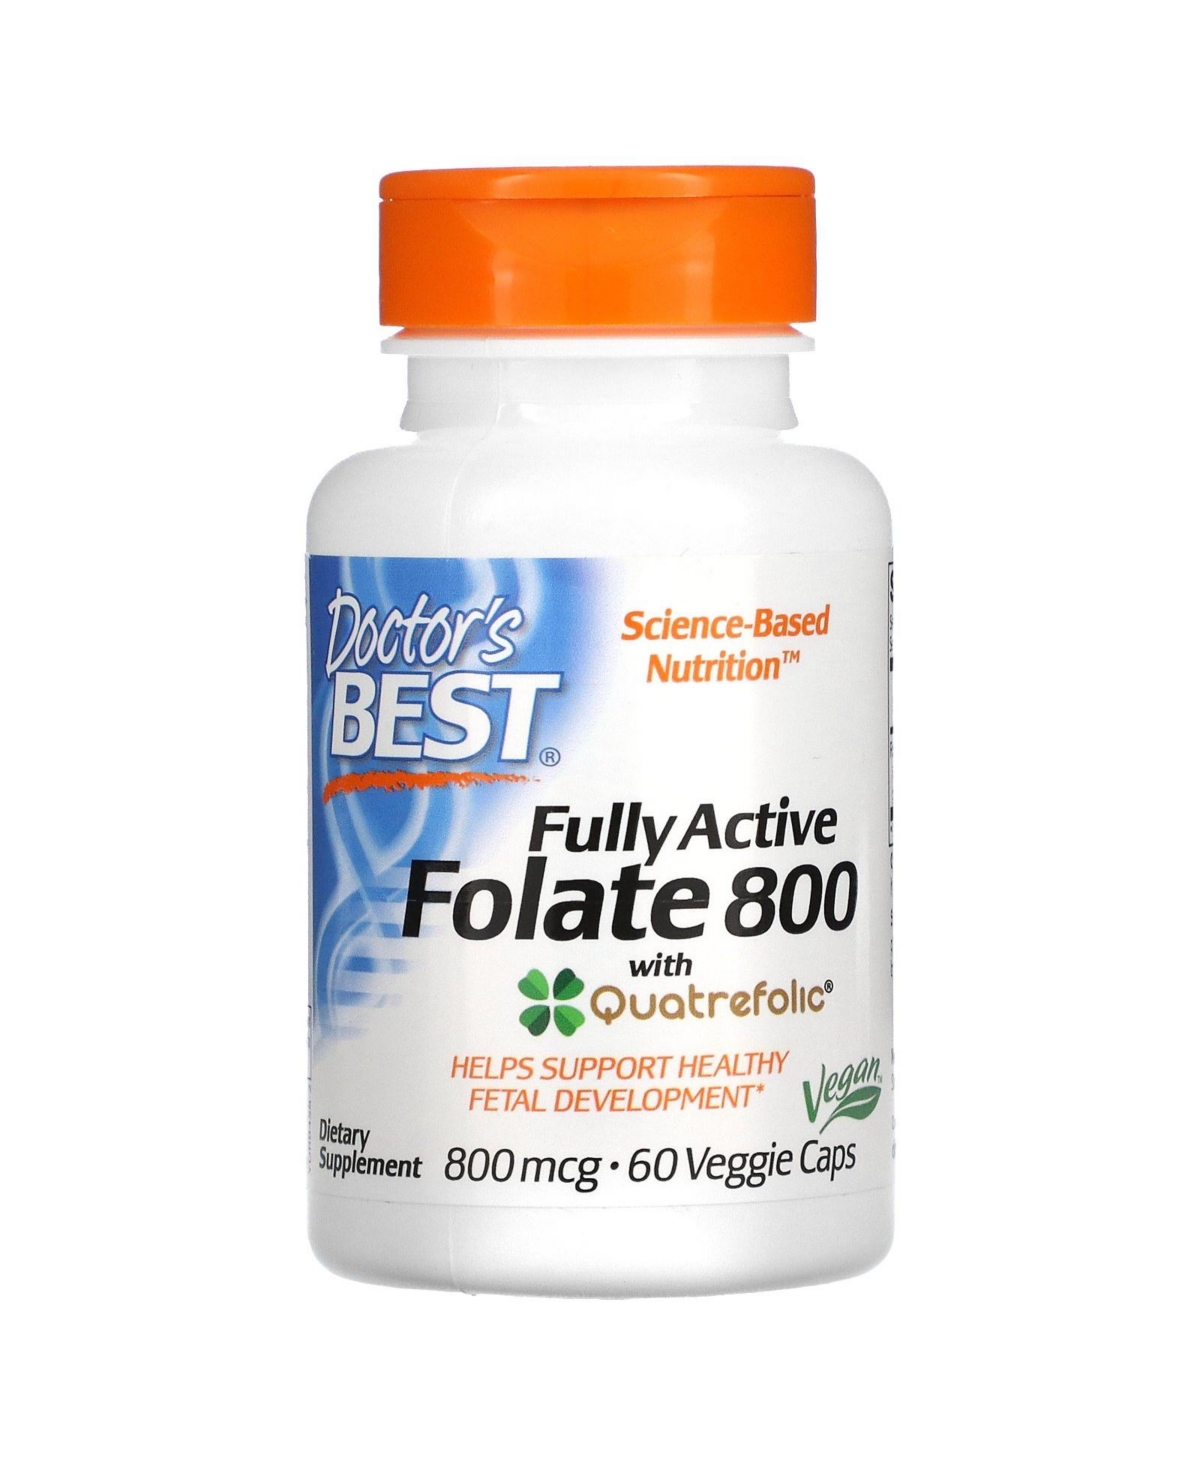 Fully Active Folate 800 with Quatrefolic 800 mcg - 60 Veggie Caps - Assorted Pre-pack (See Table